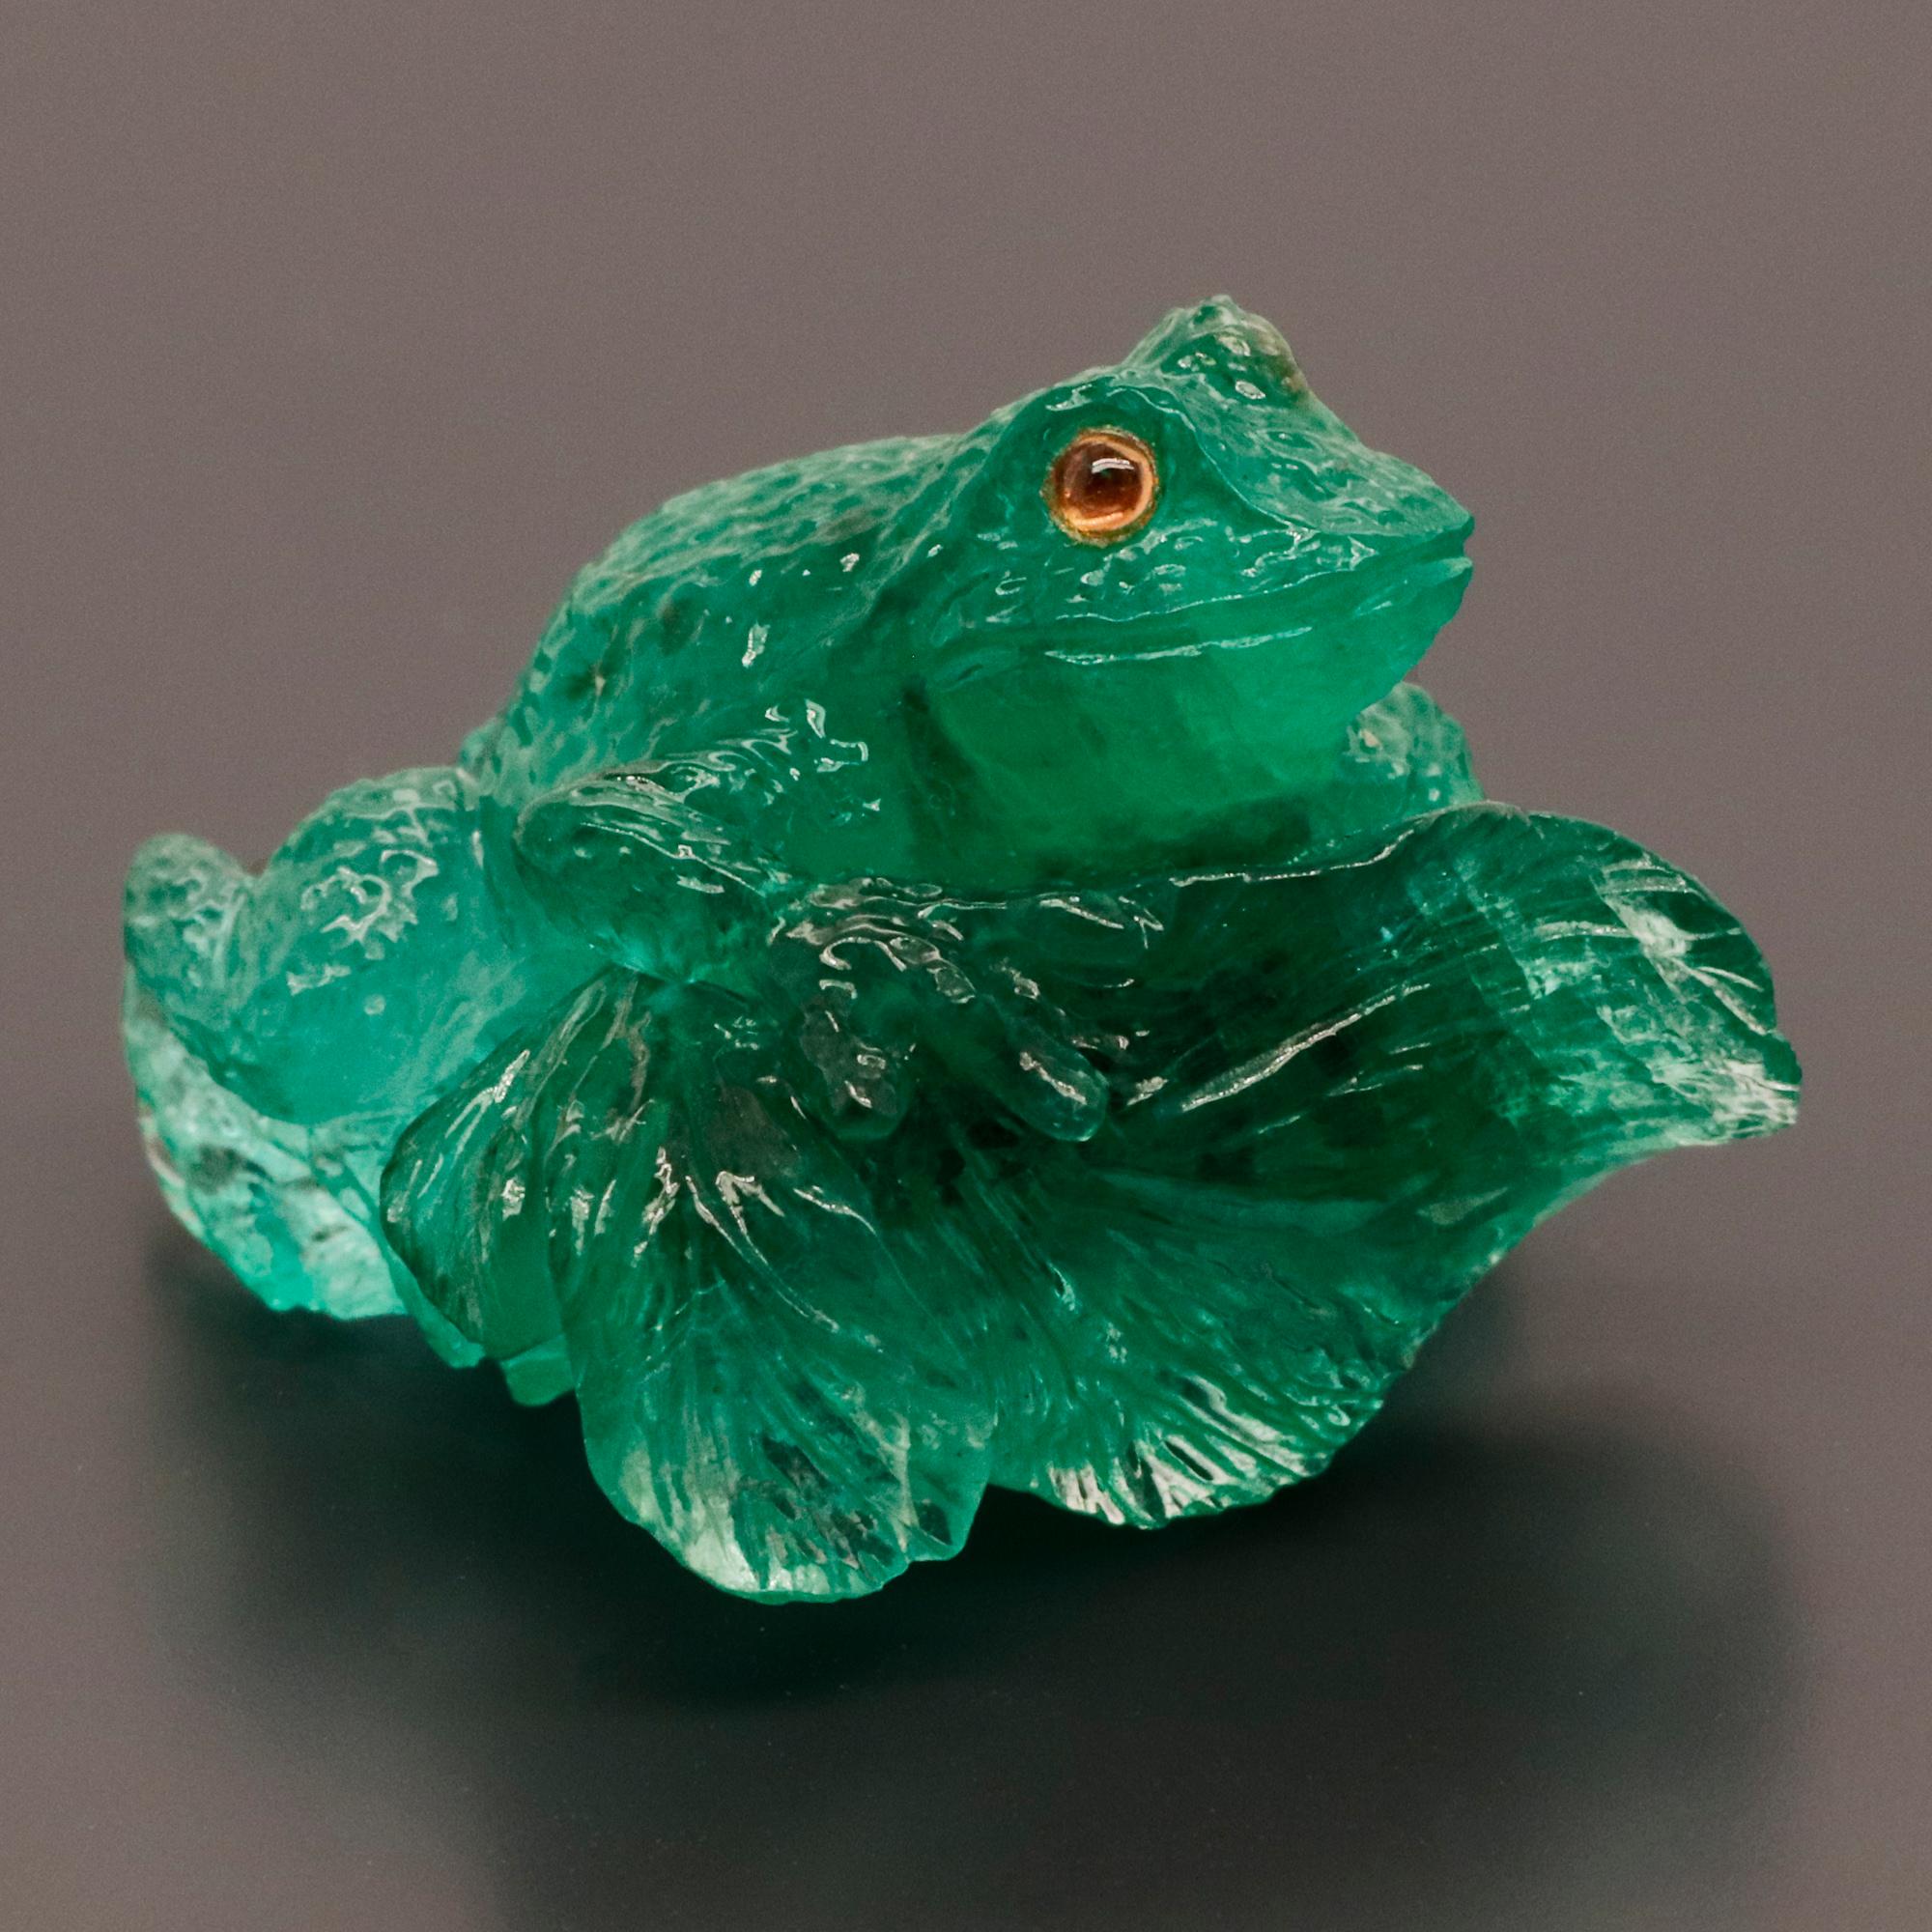 A skillfully curved green Emerald representing the frog sitting on a leaf.
Frogs are generally viewed as symbol of good luck and health. In many cultures and beliefs, frogs predominantly embody luck with regards to prosperity.

Material -